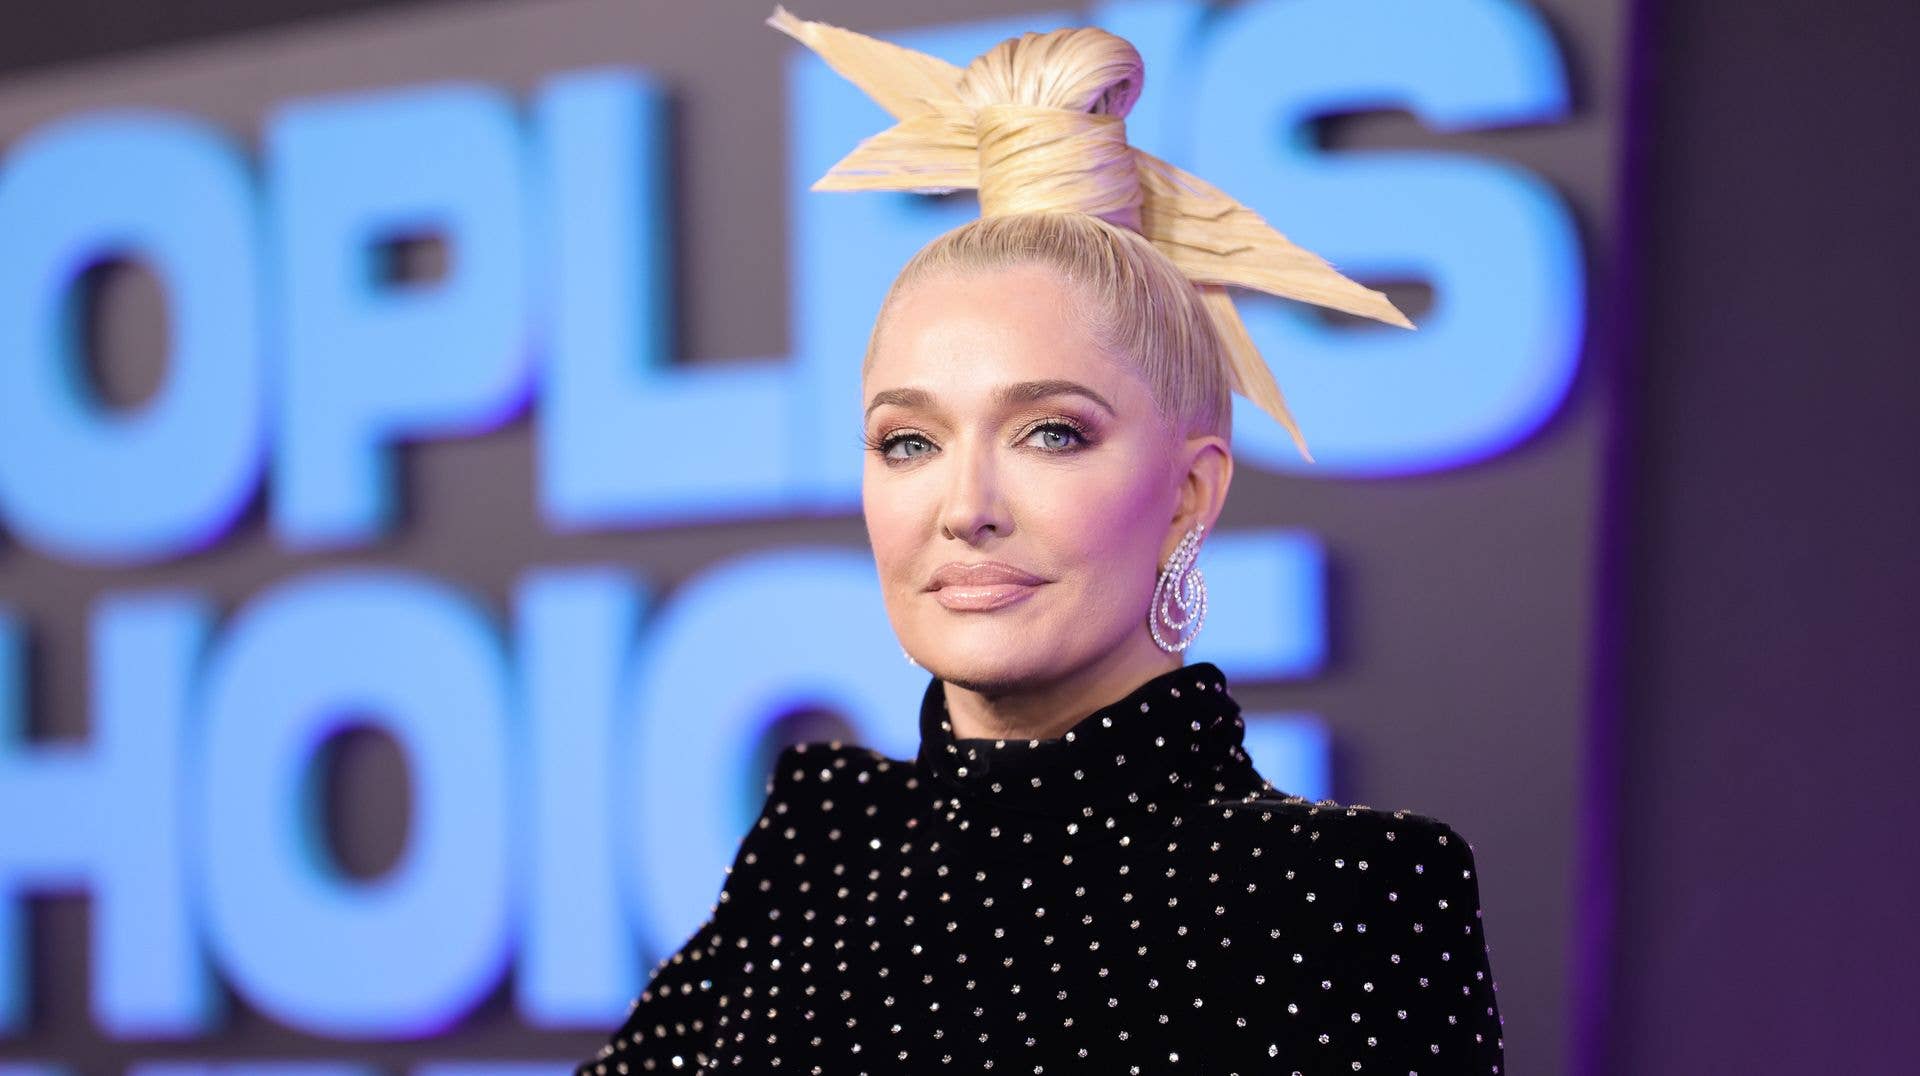 Erika Jayne attends the 47th Annual People's Choice Awards